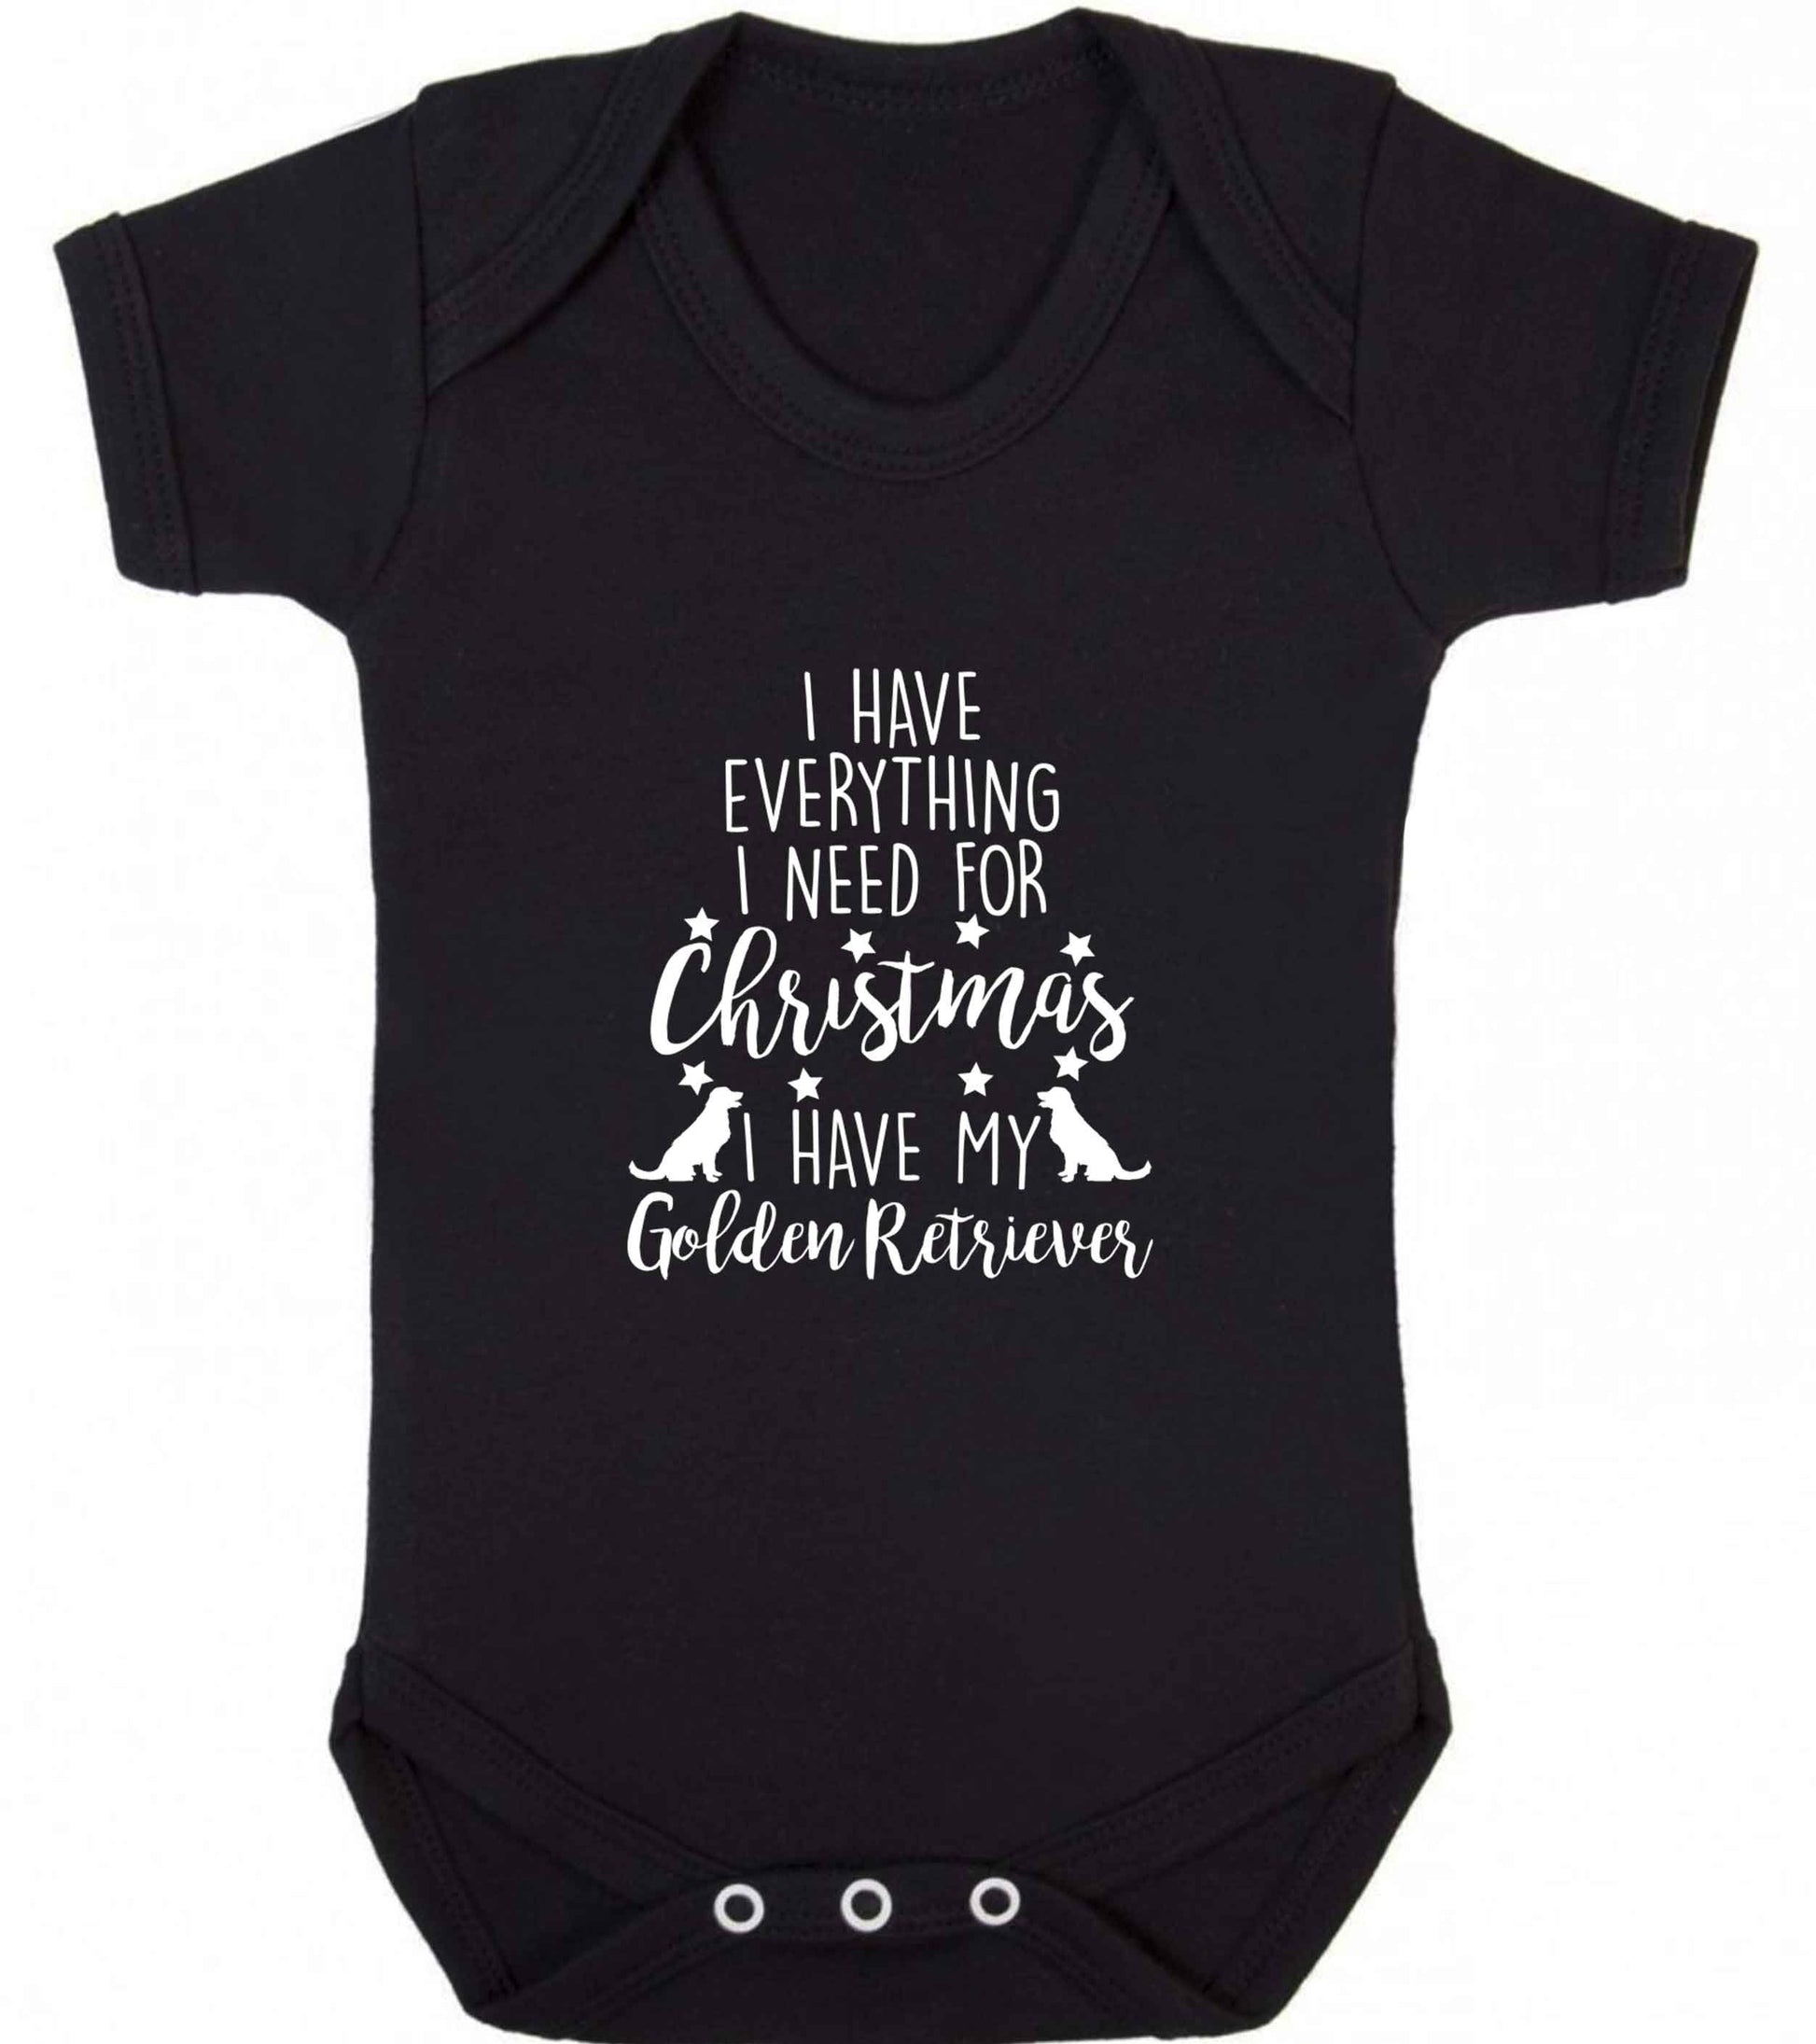 I have everything I need for Christmas I have my golden retriever baby vest black 18-24 months